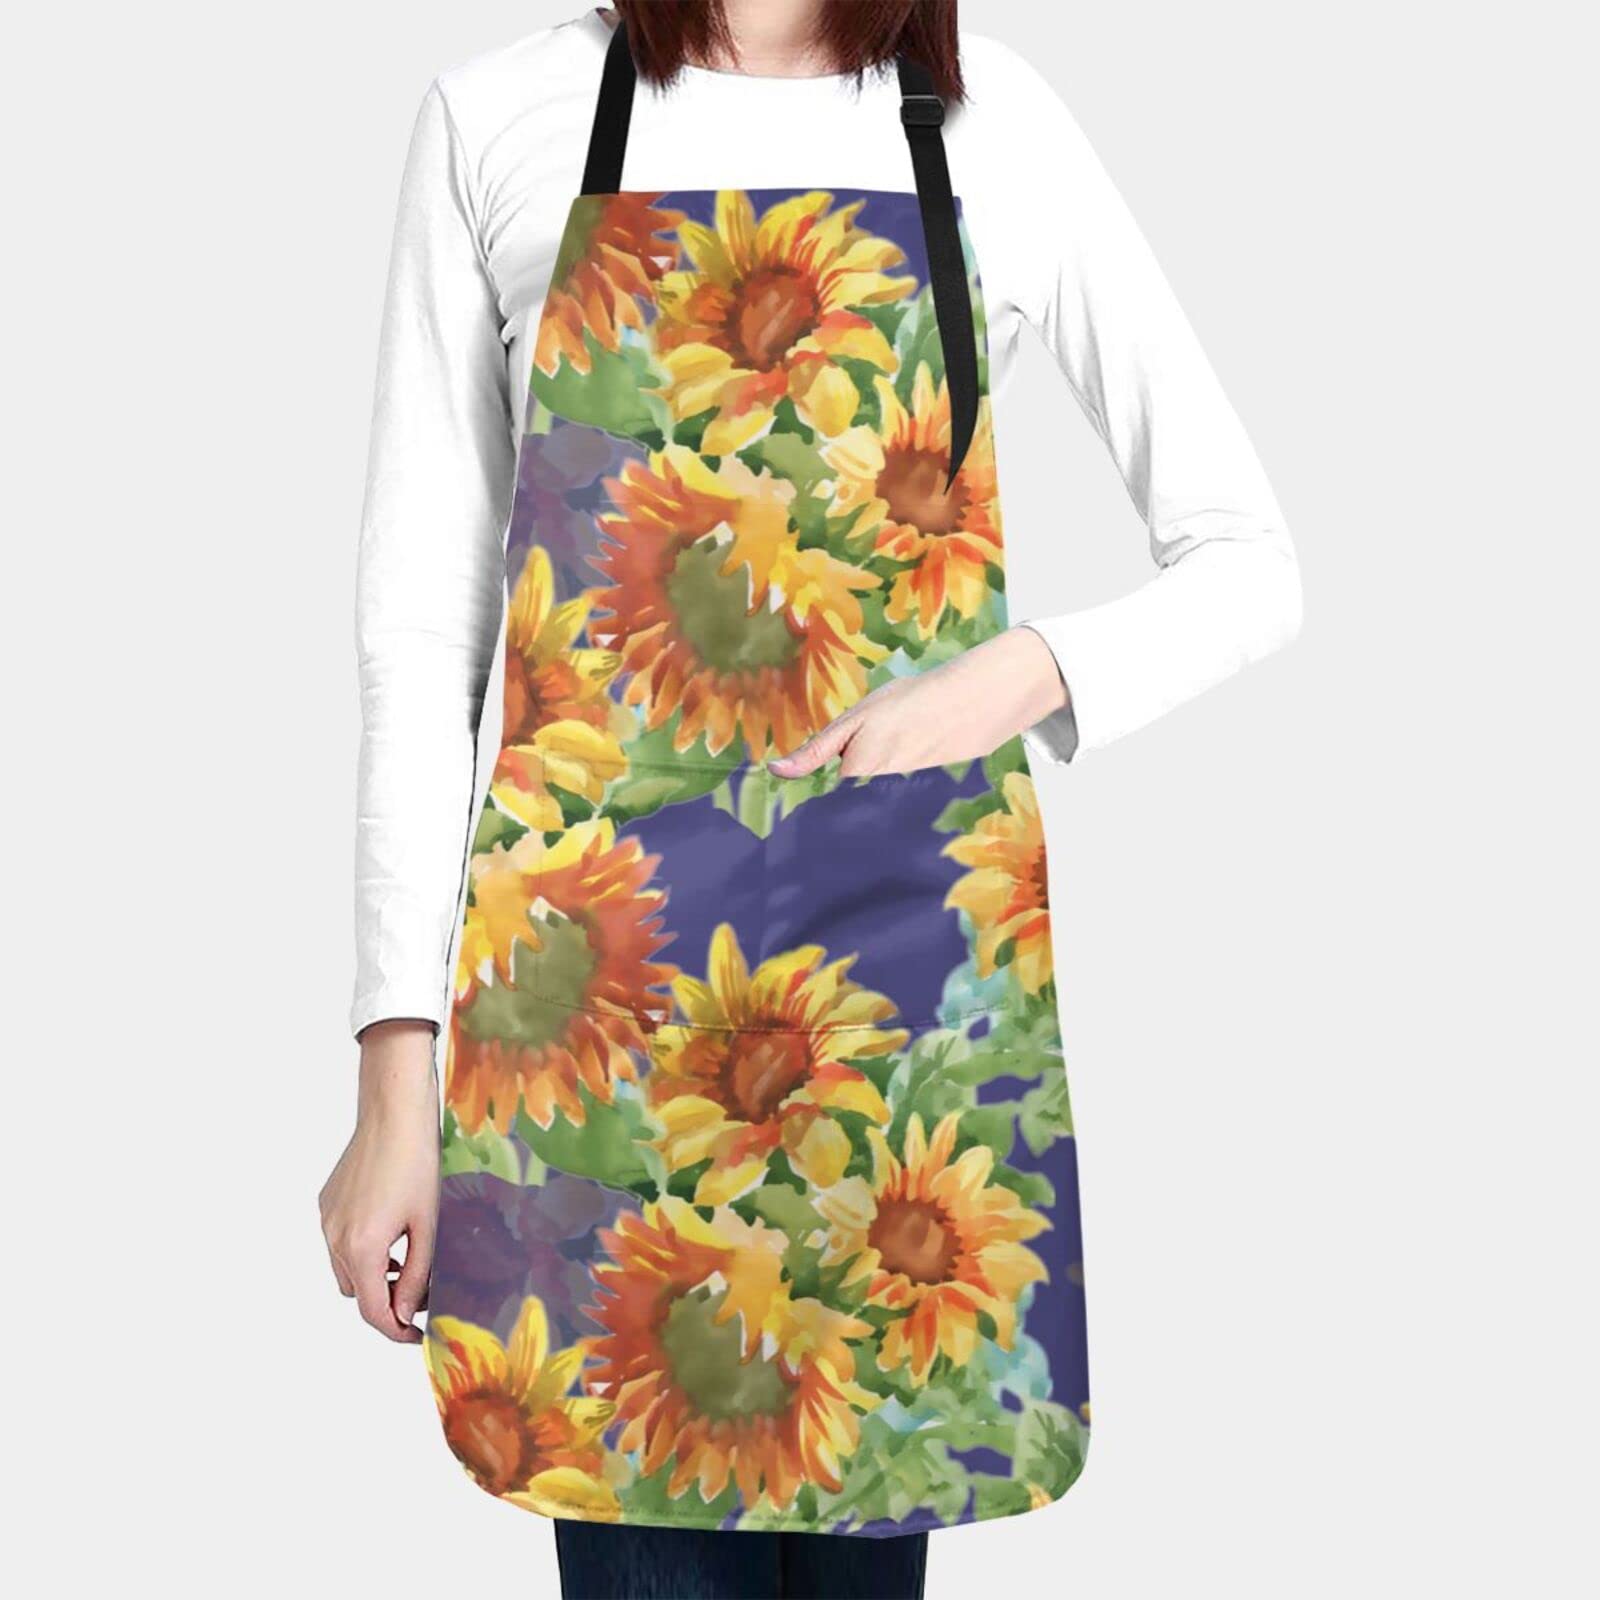 Oplp Watercolor Sunflowers Summer 3 Piece Kitchen Set Waterproof Apron with Oven Mitt and Pot Holder Cooking Adjustable Apron Microwave Glove Potholder